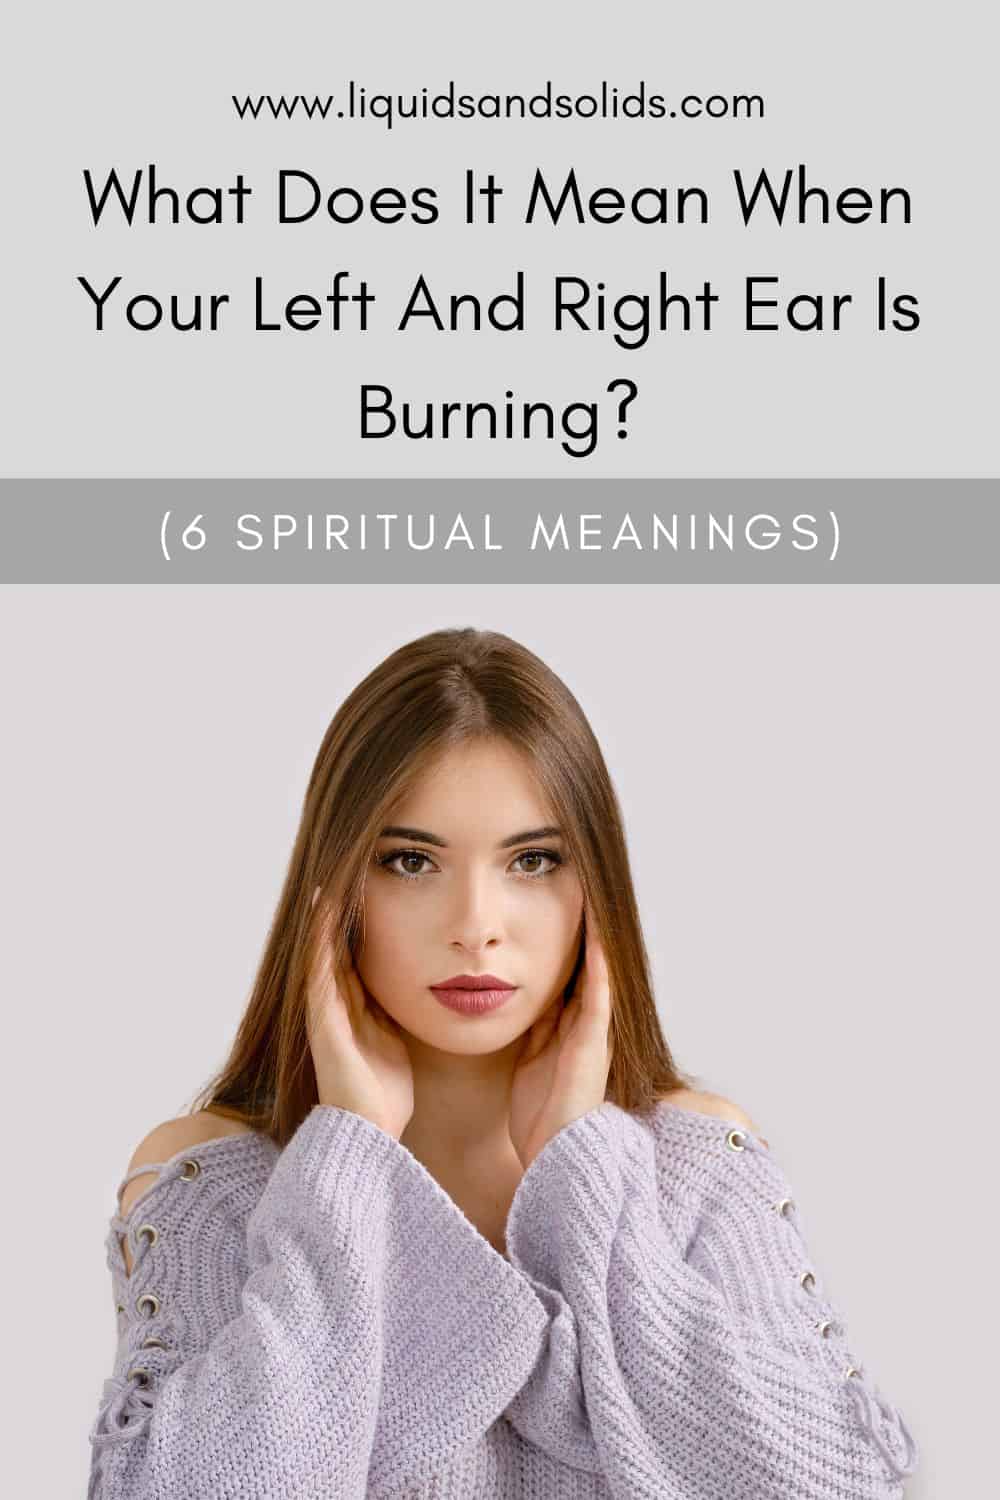 Spiritual Meanings of Left and Right Ear Burning